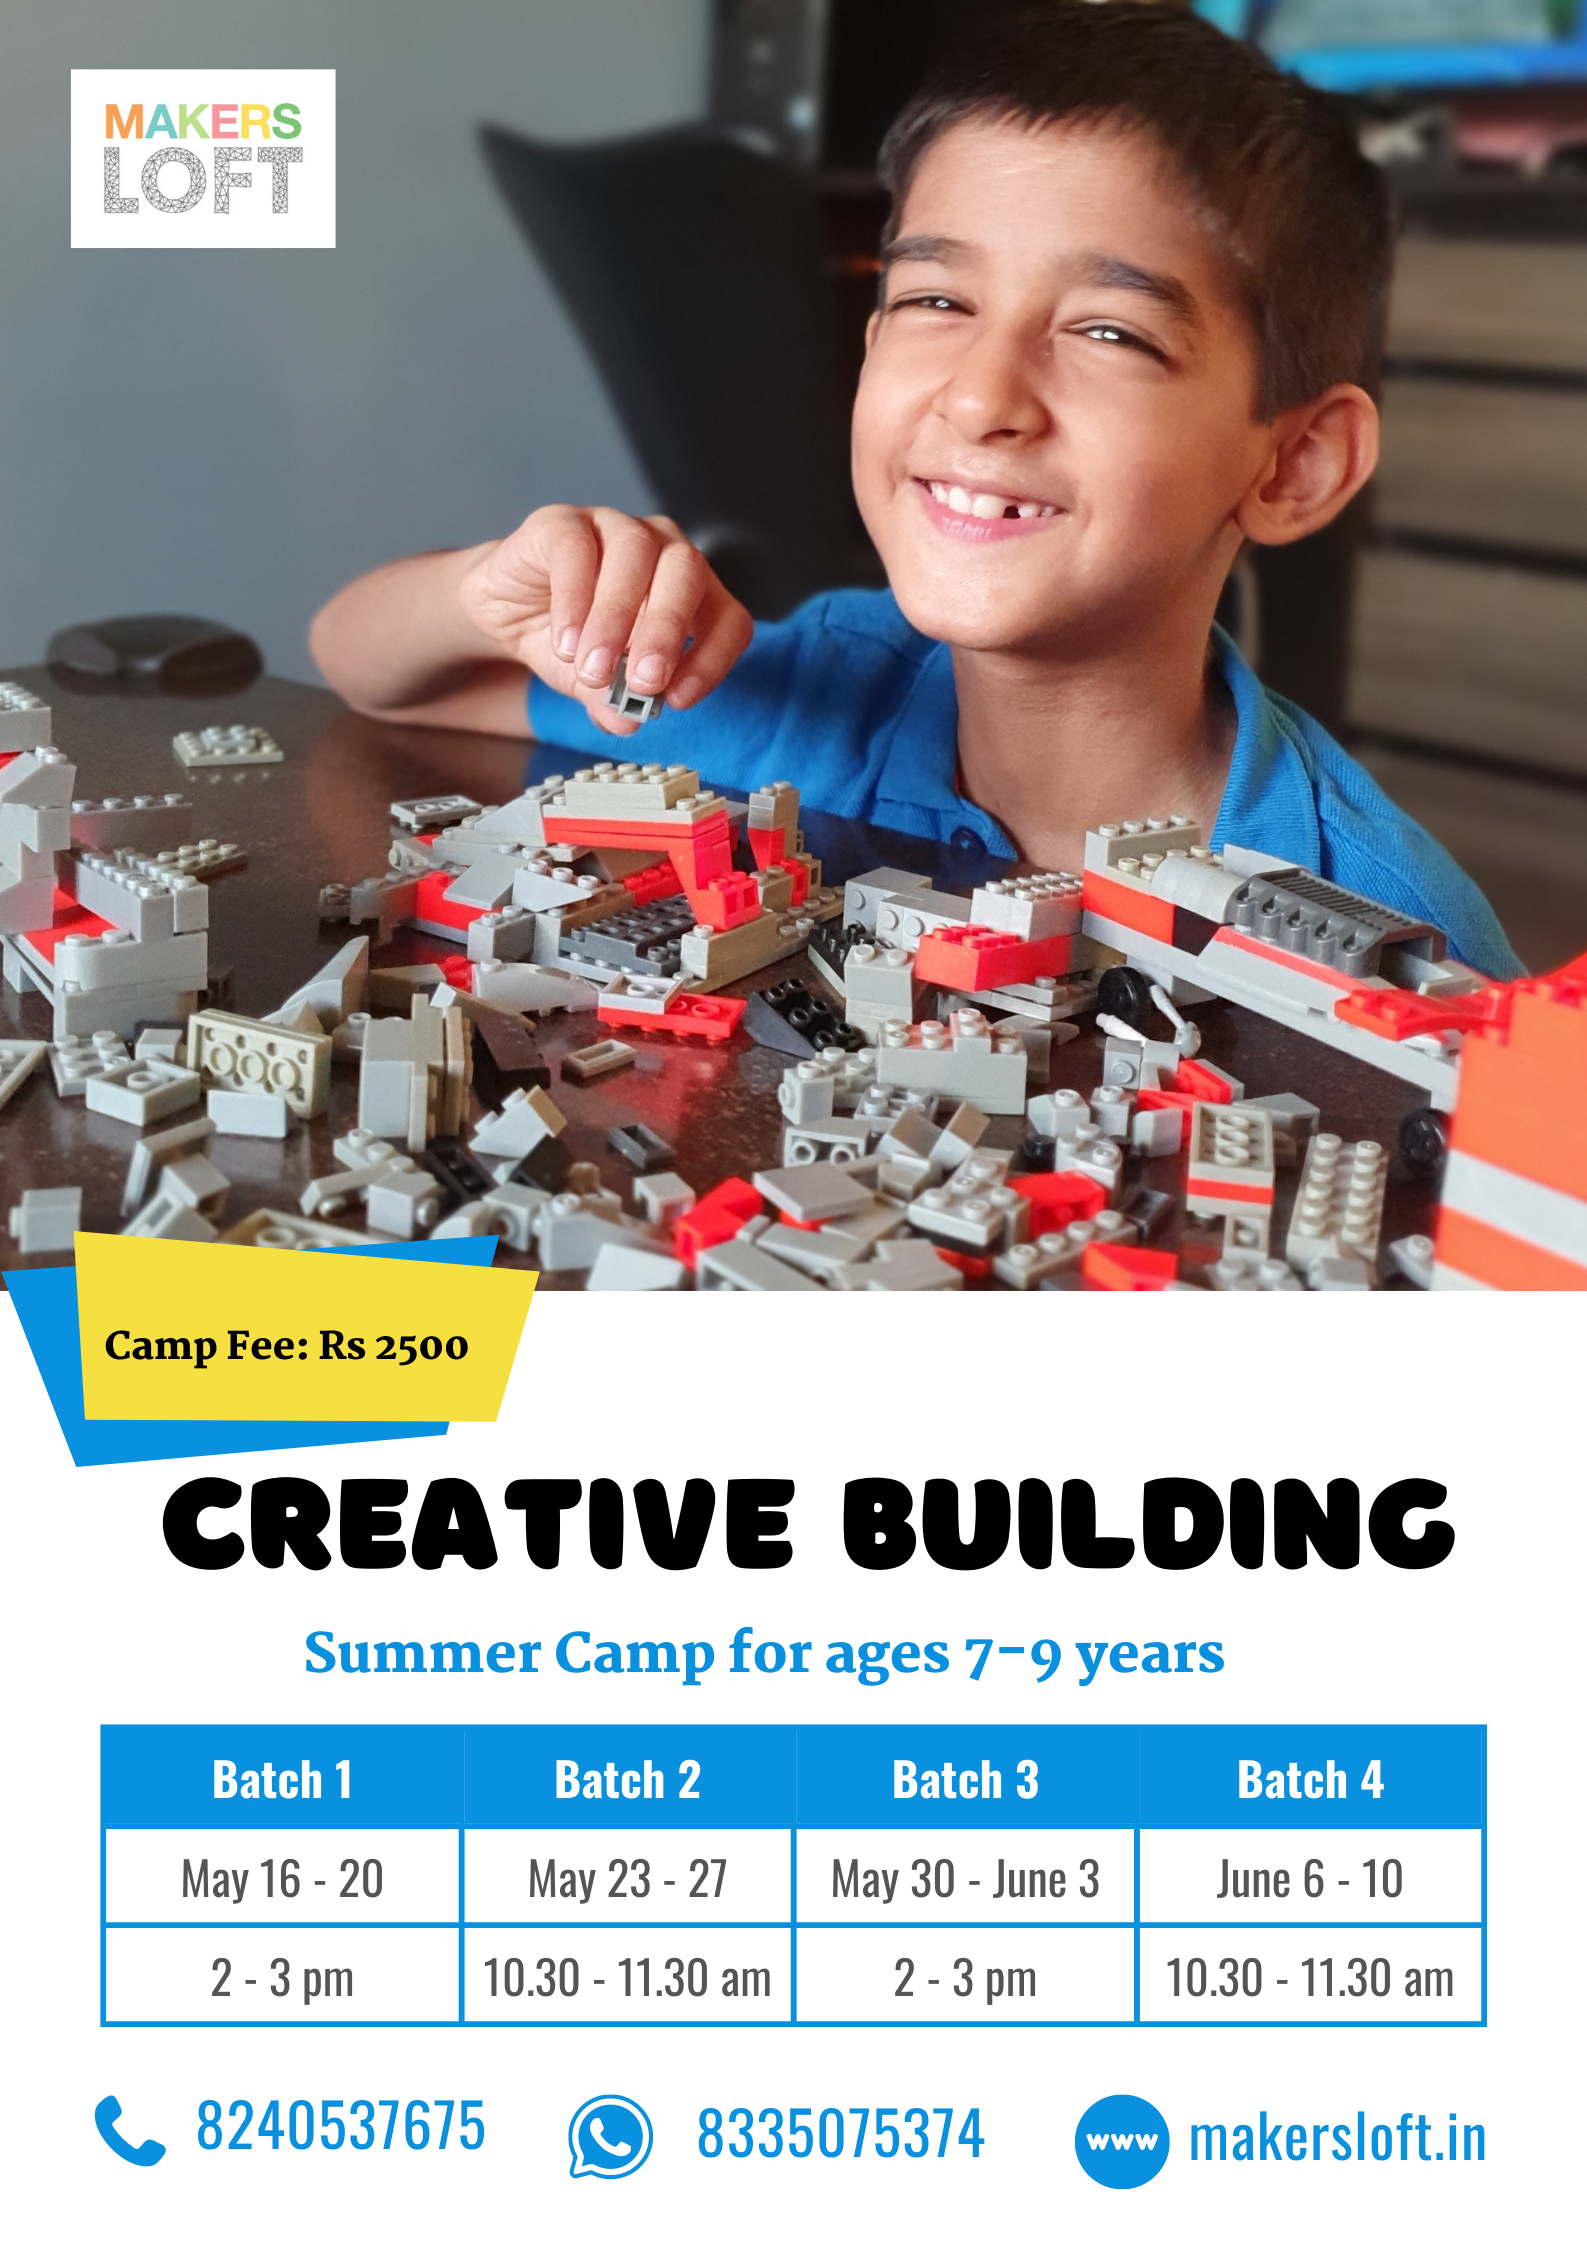 Lego Online Course for 7-9 years